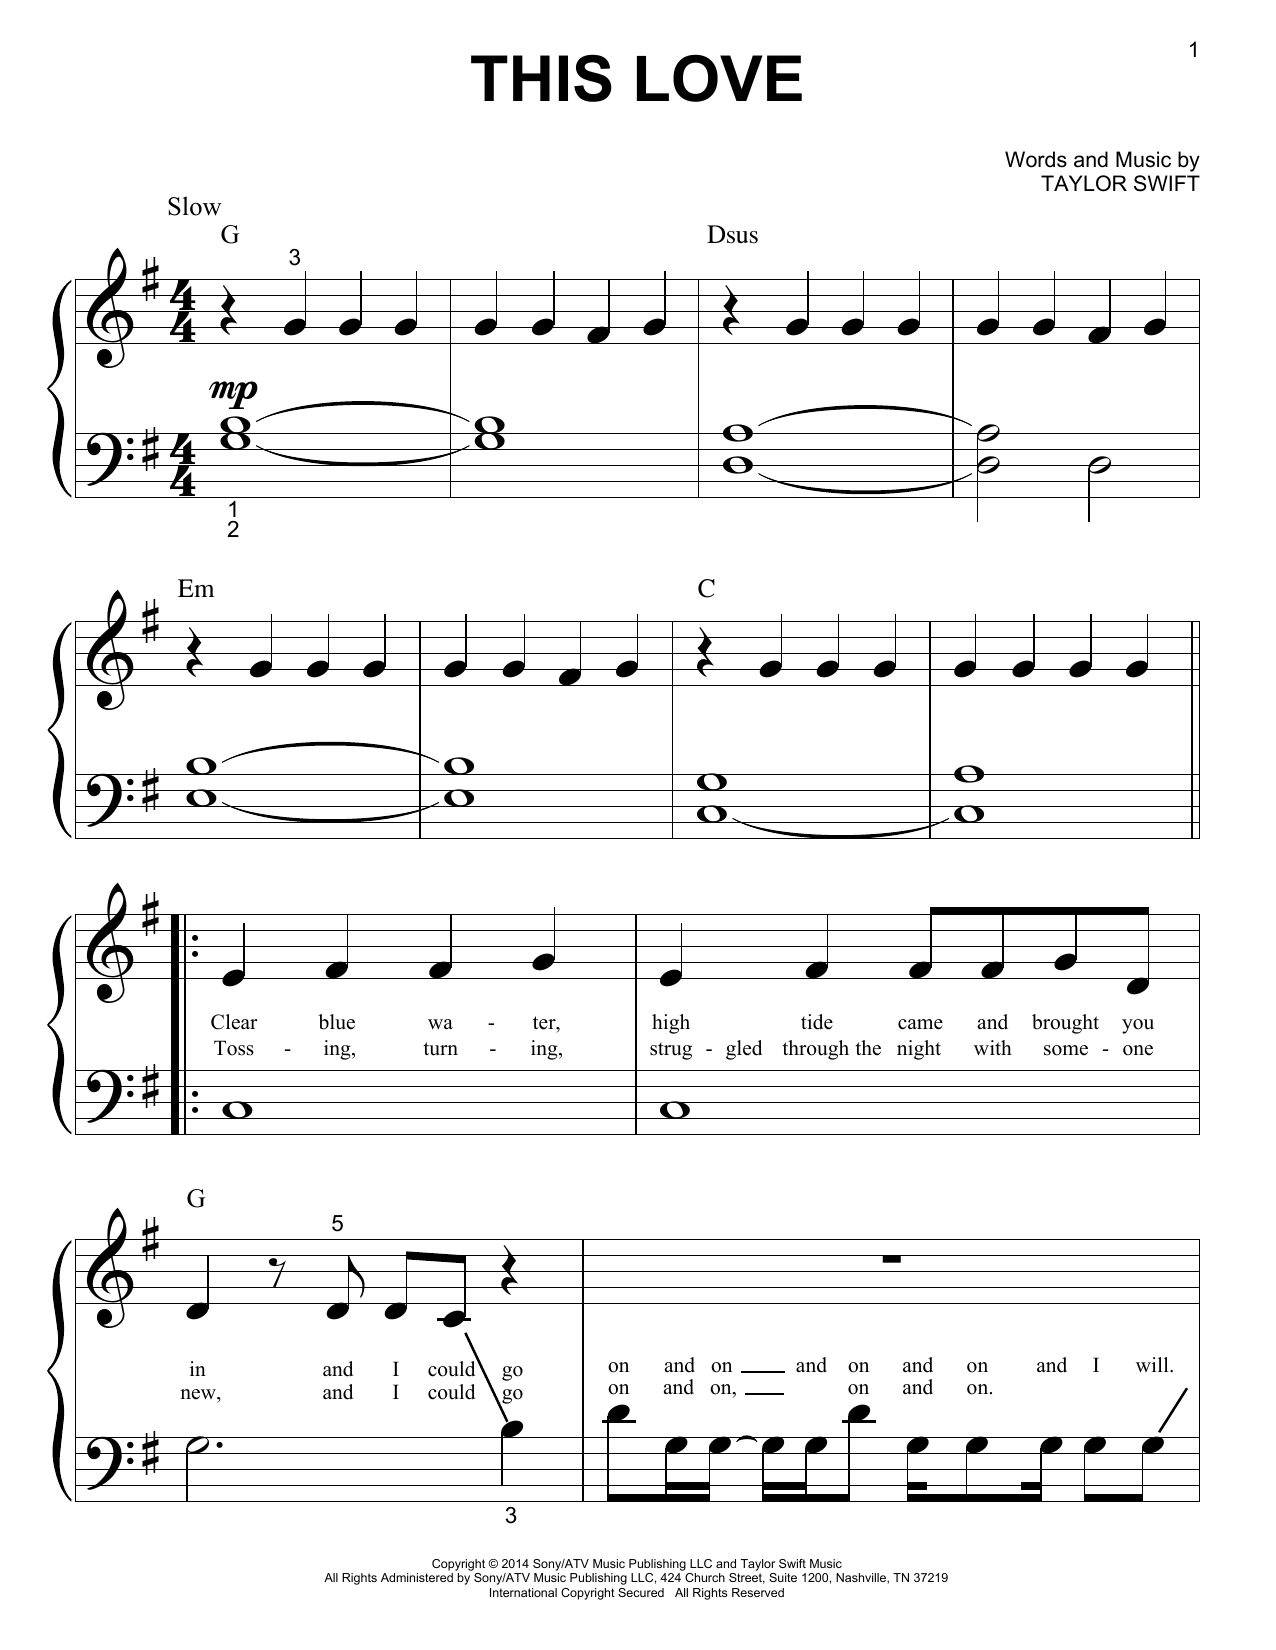 Download Taylor Swift This Love Sheet Music